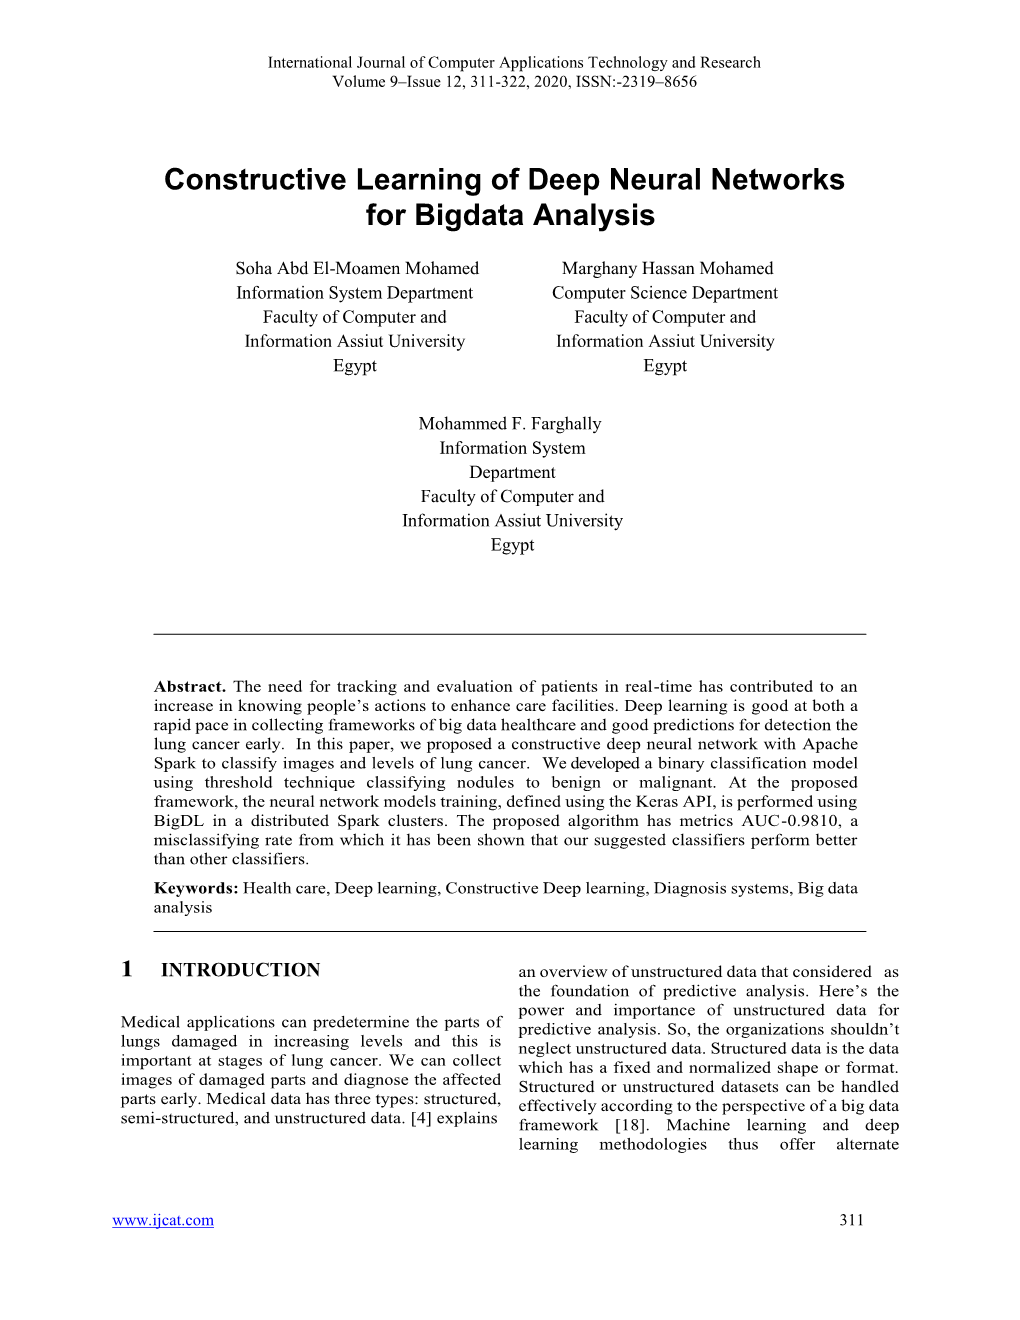 Constructive Learning of Deep Neural Networks for Bigdata Analysis